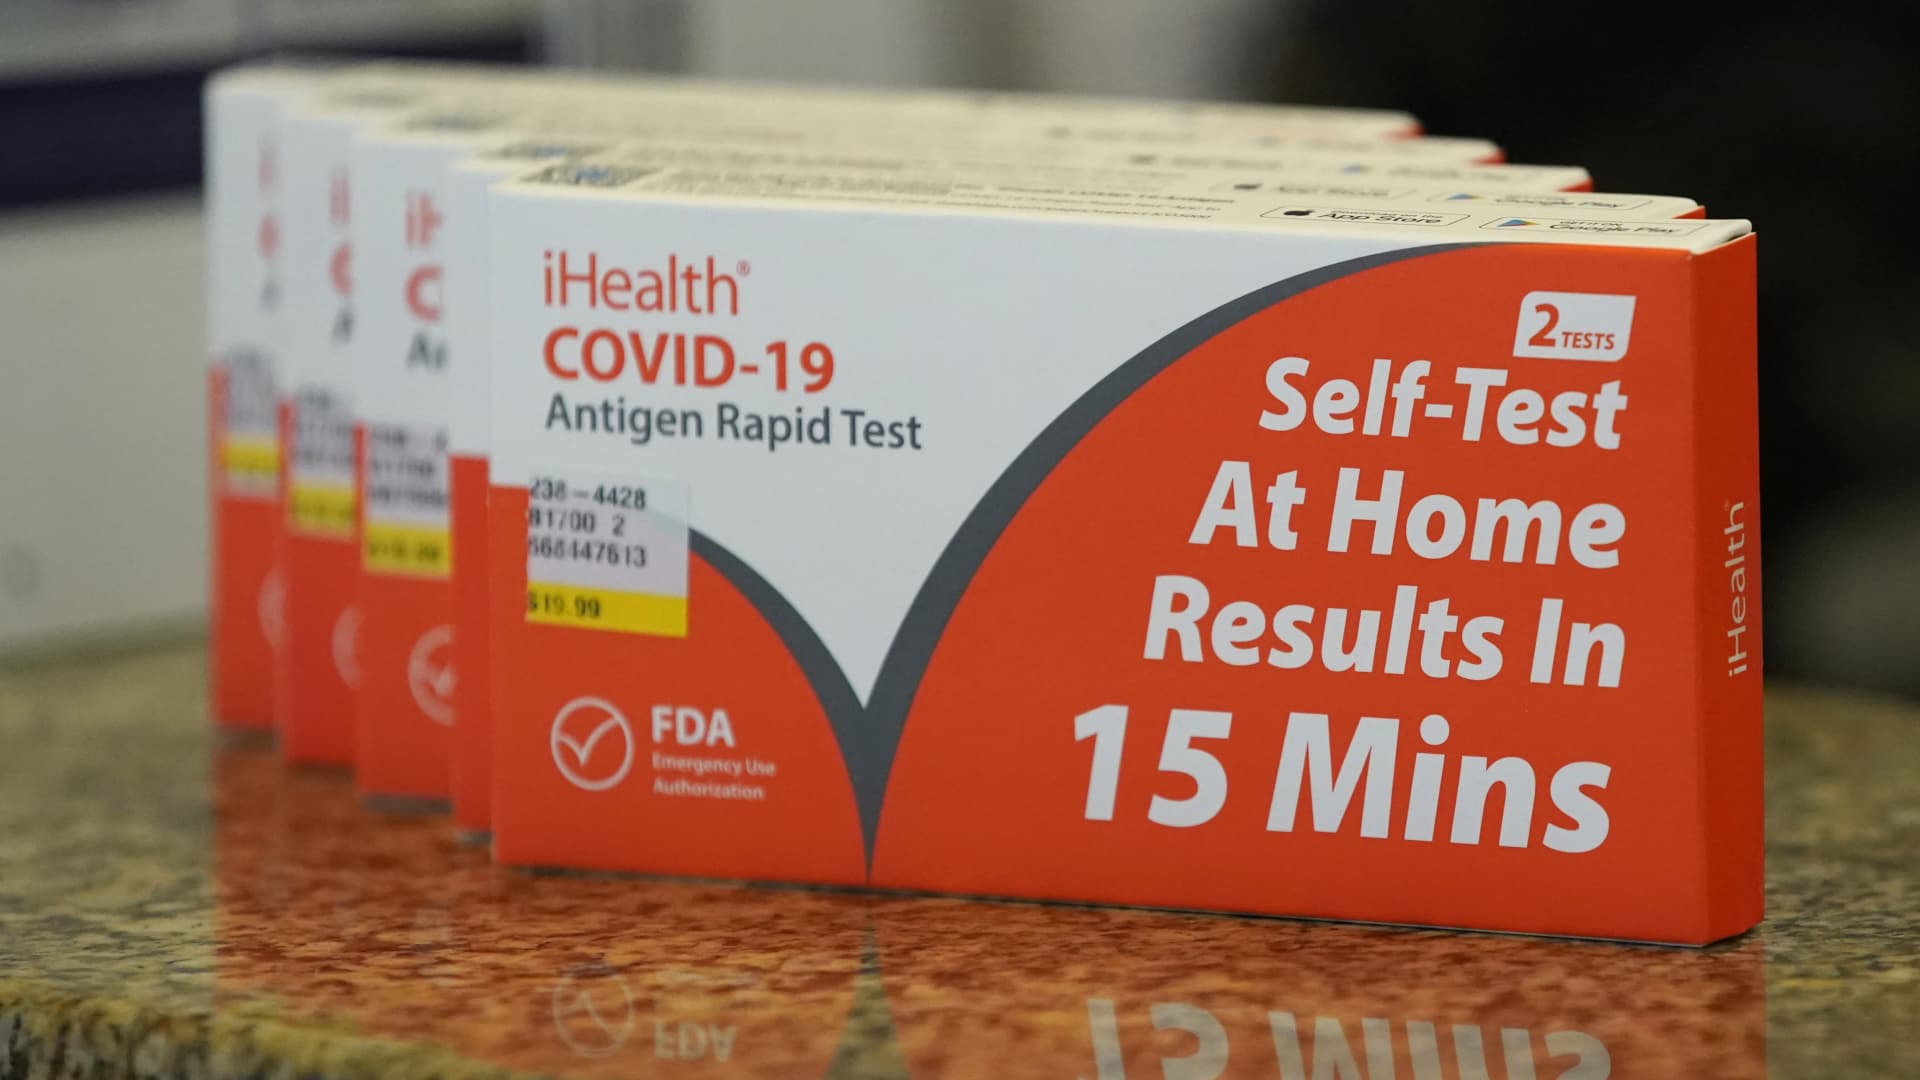 Biden administration to stop sending free at-home Covid-19 tests Friday